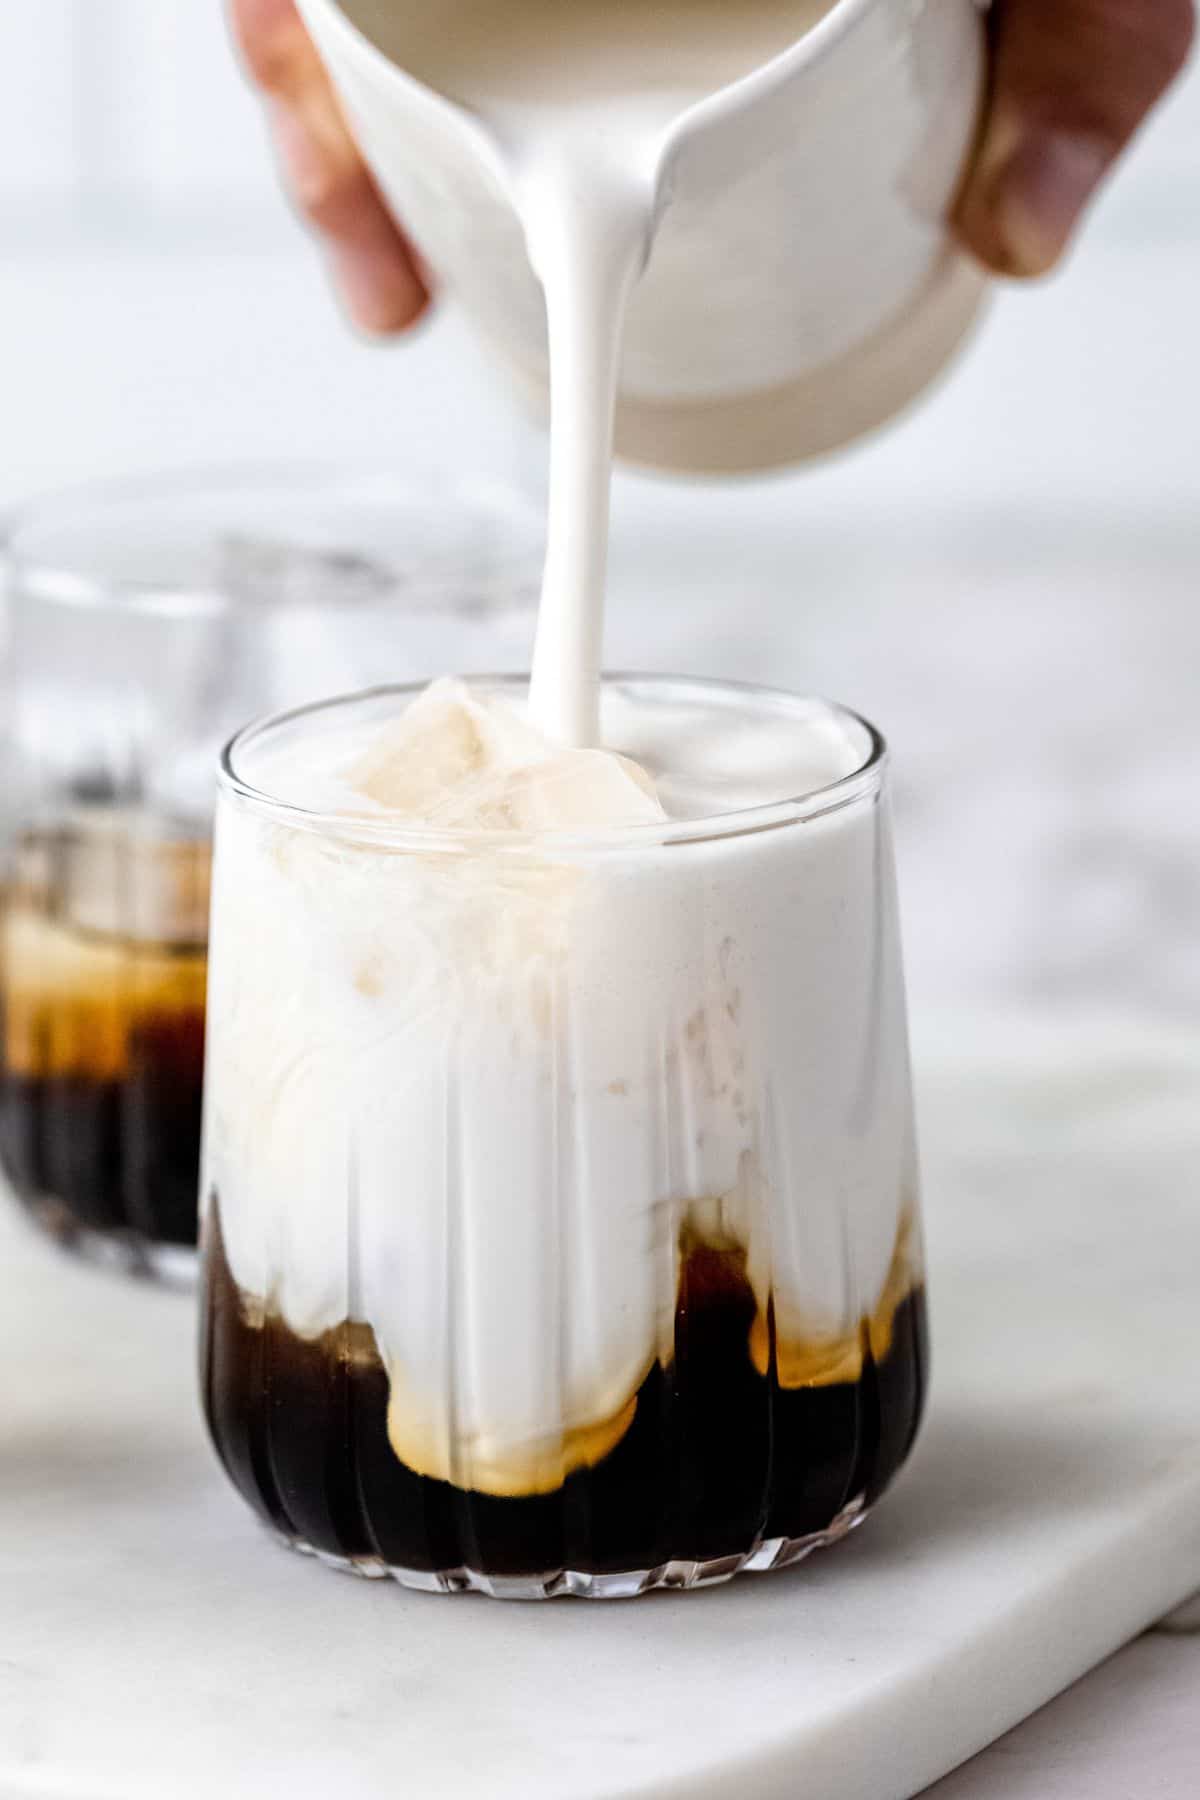 Pouring coconut milk over kahlua and vodka.